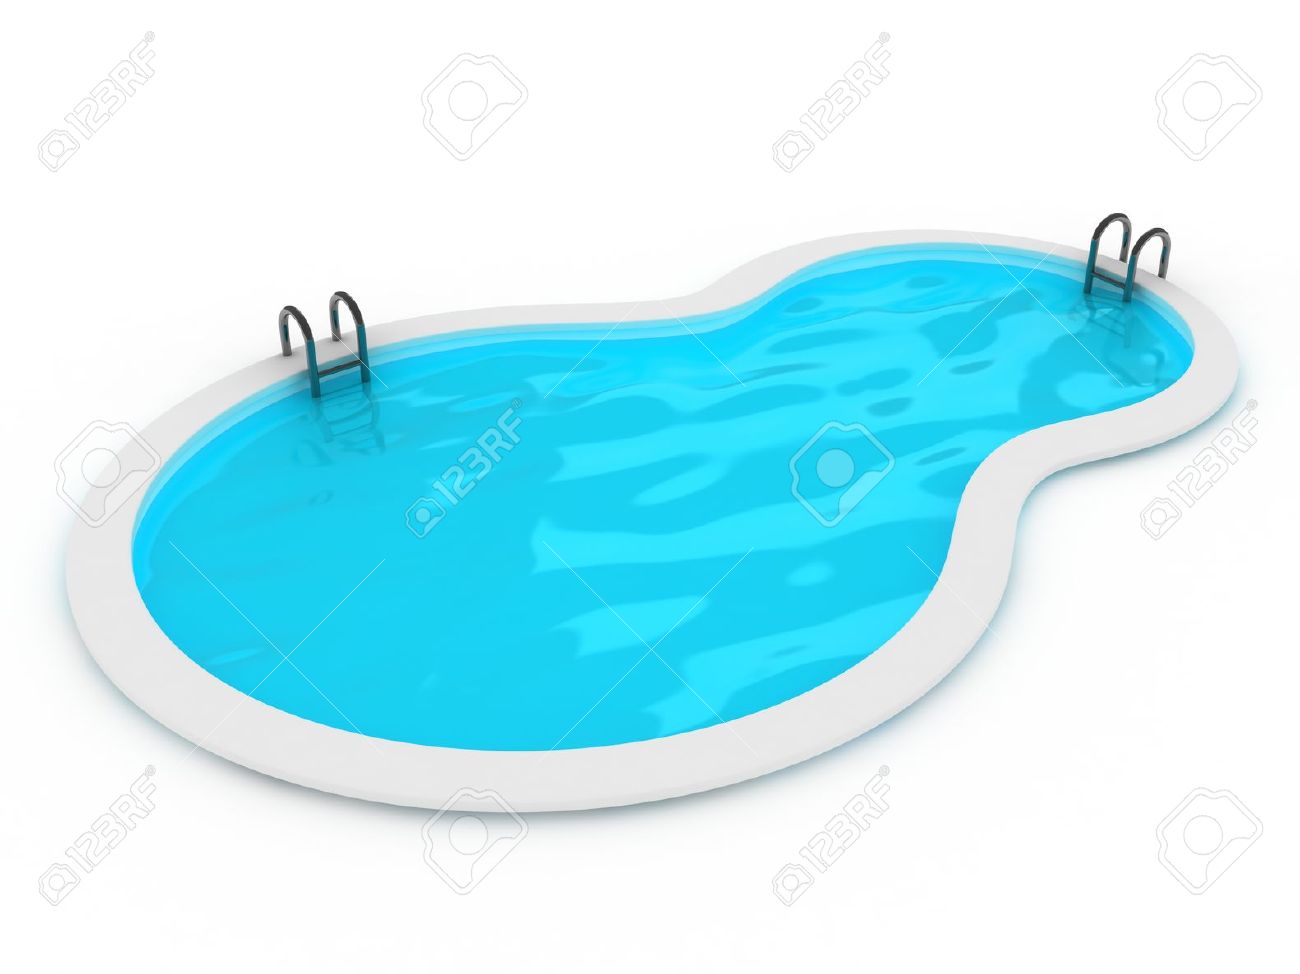 Pool clipart free.